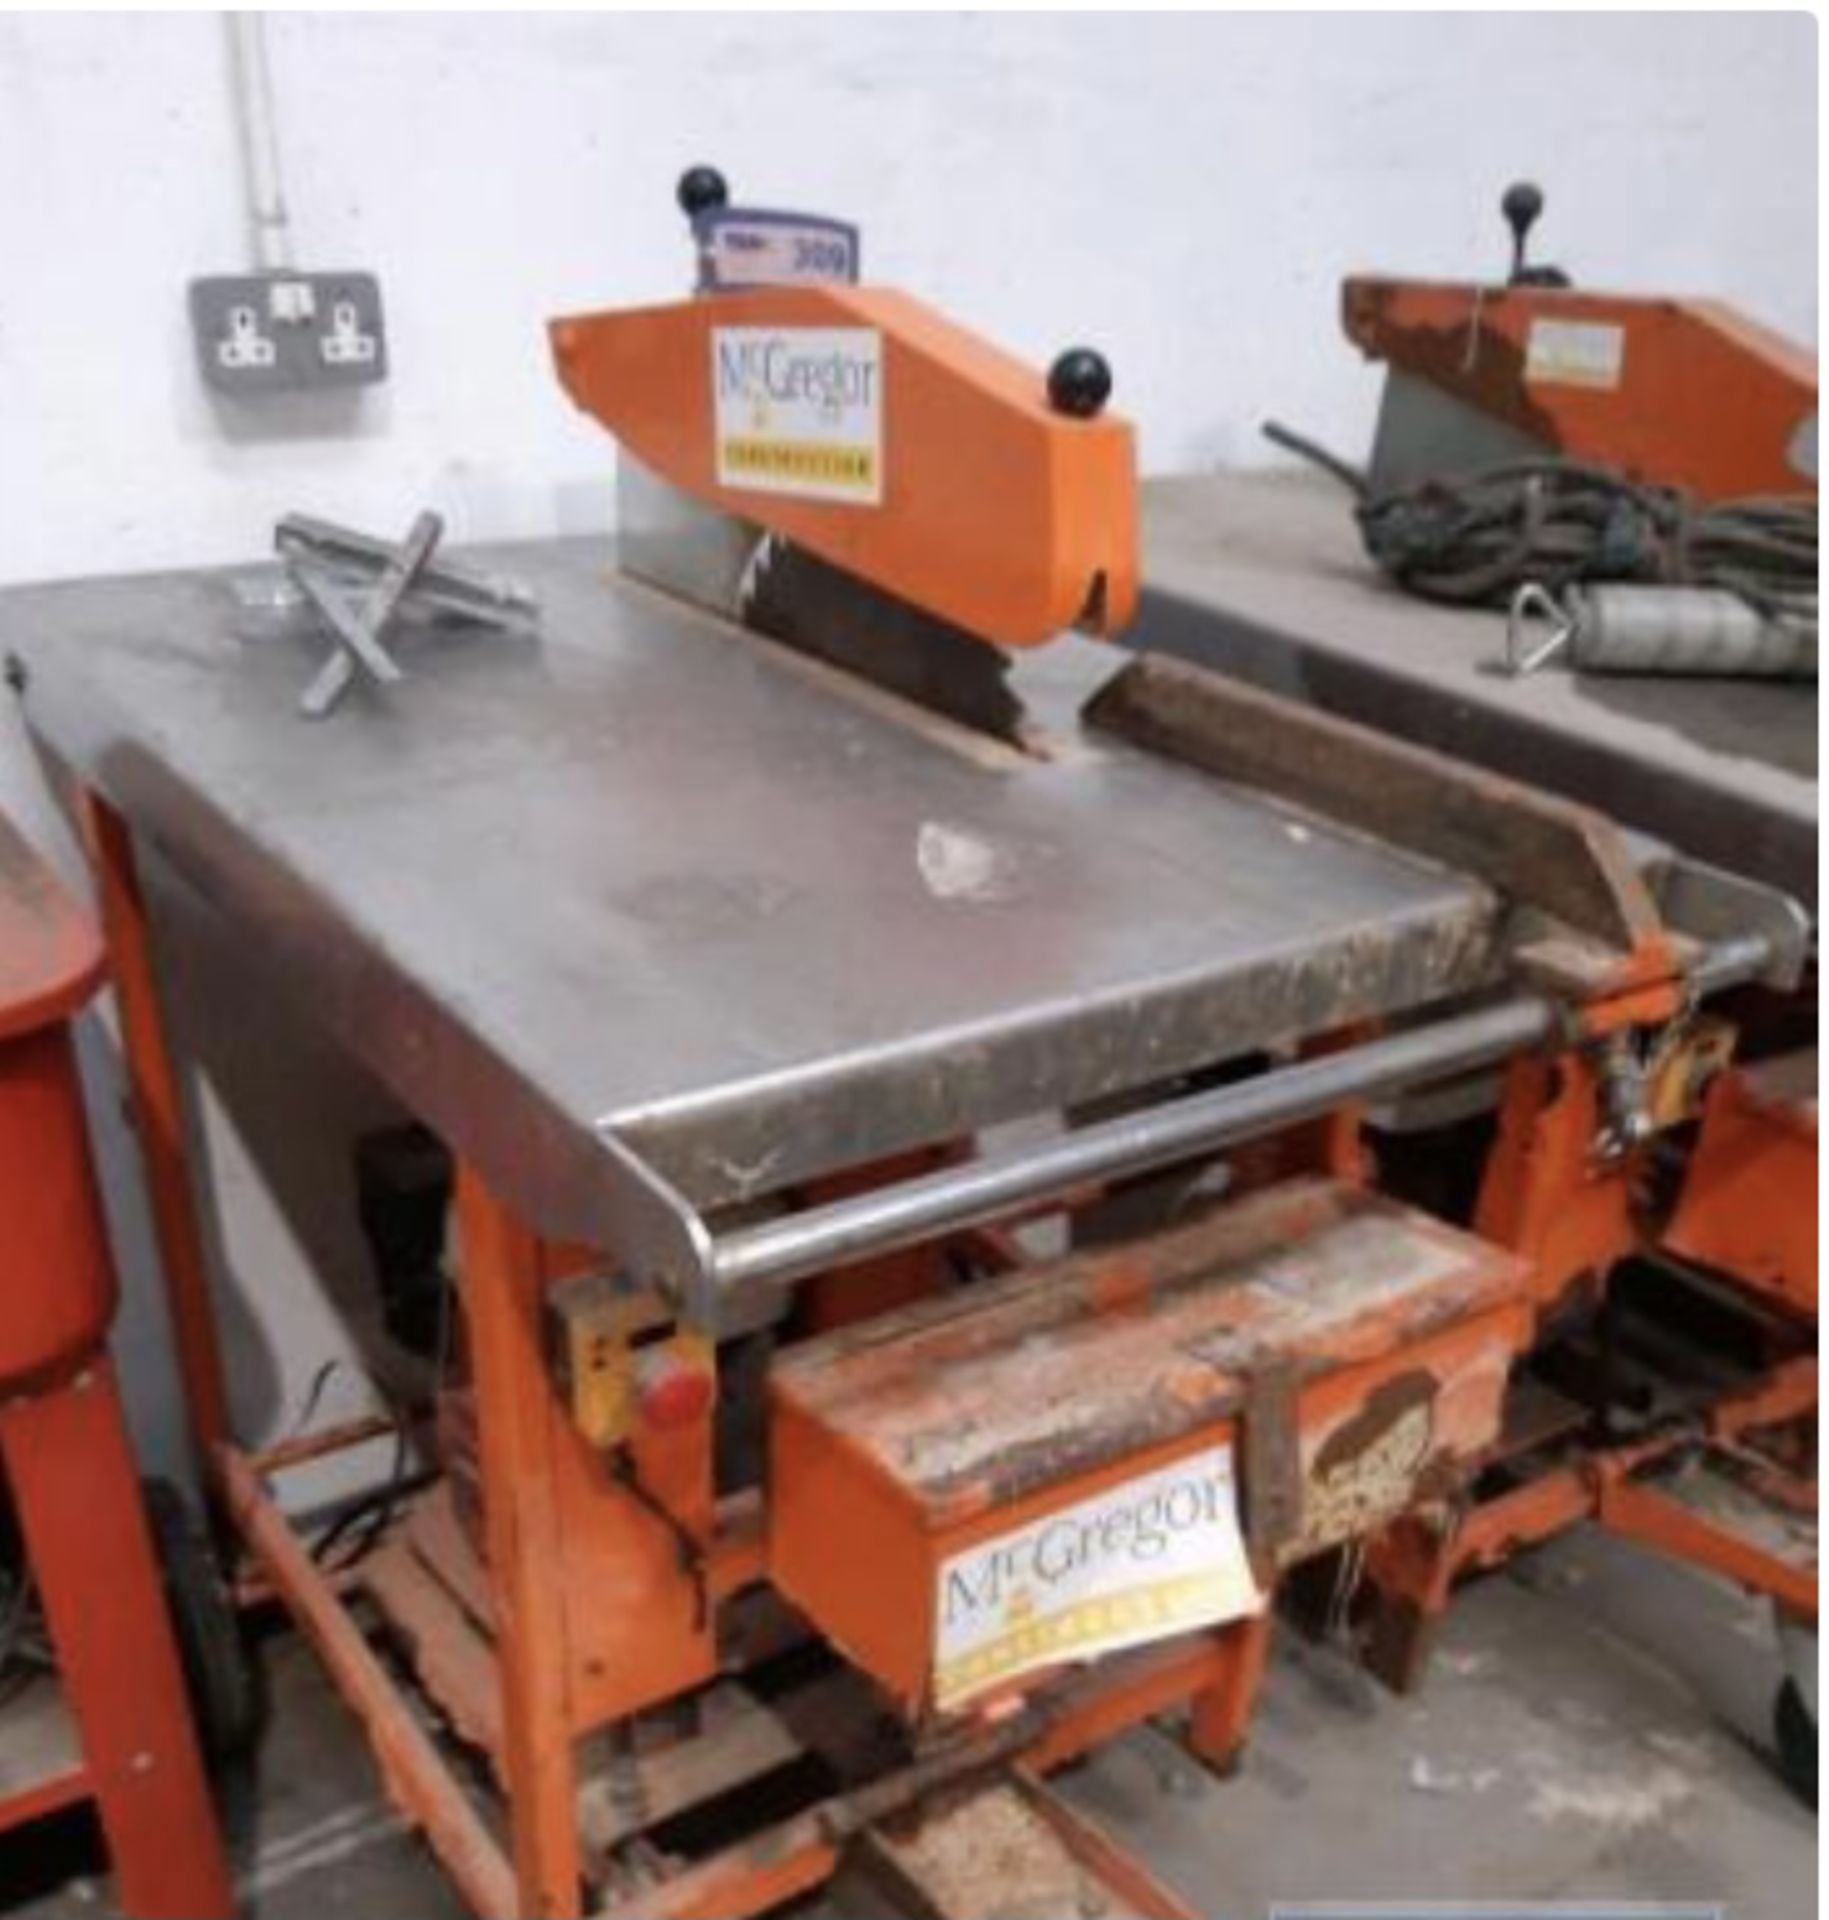 CLIPPER HONDA ENGINE TABLE SAW.LOCATION NORTH YORKSHIRE. - Image 4 of 5